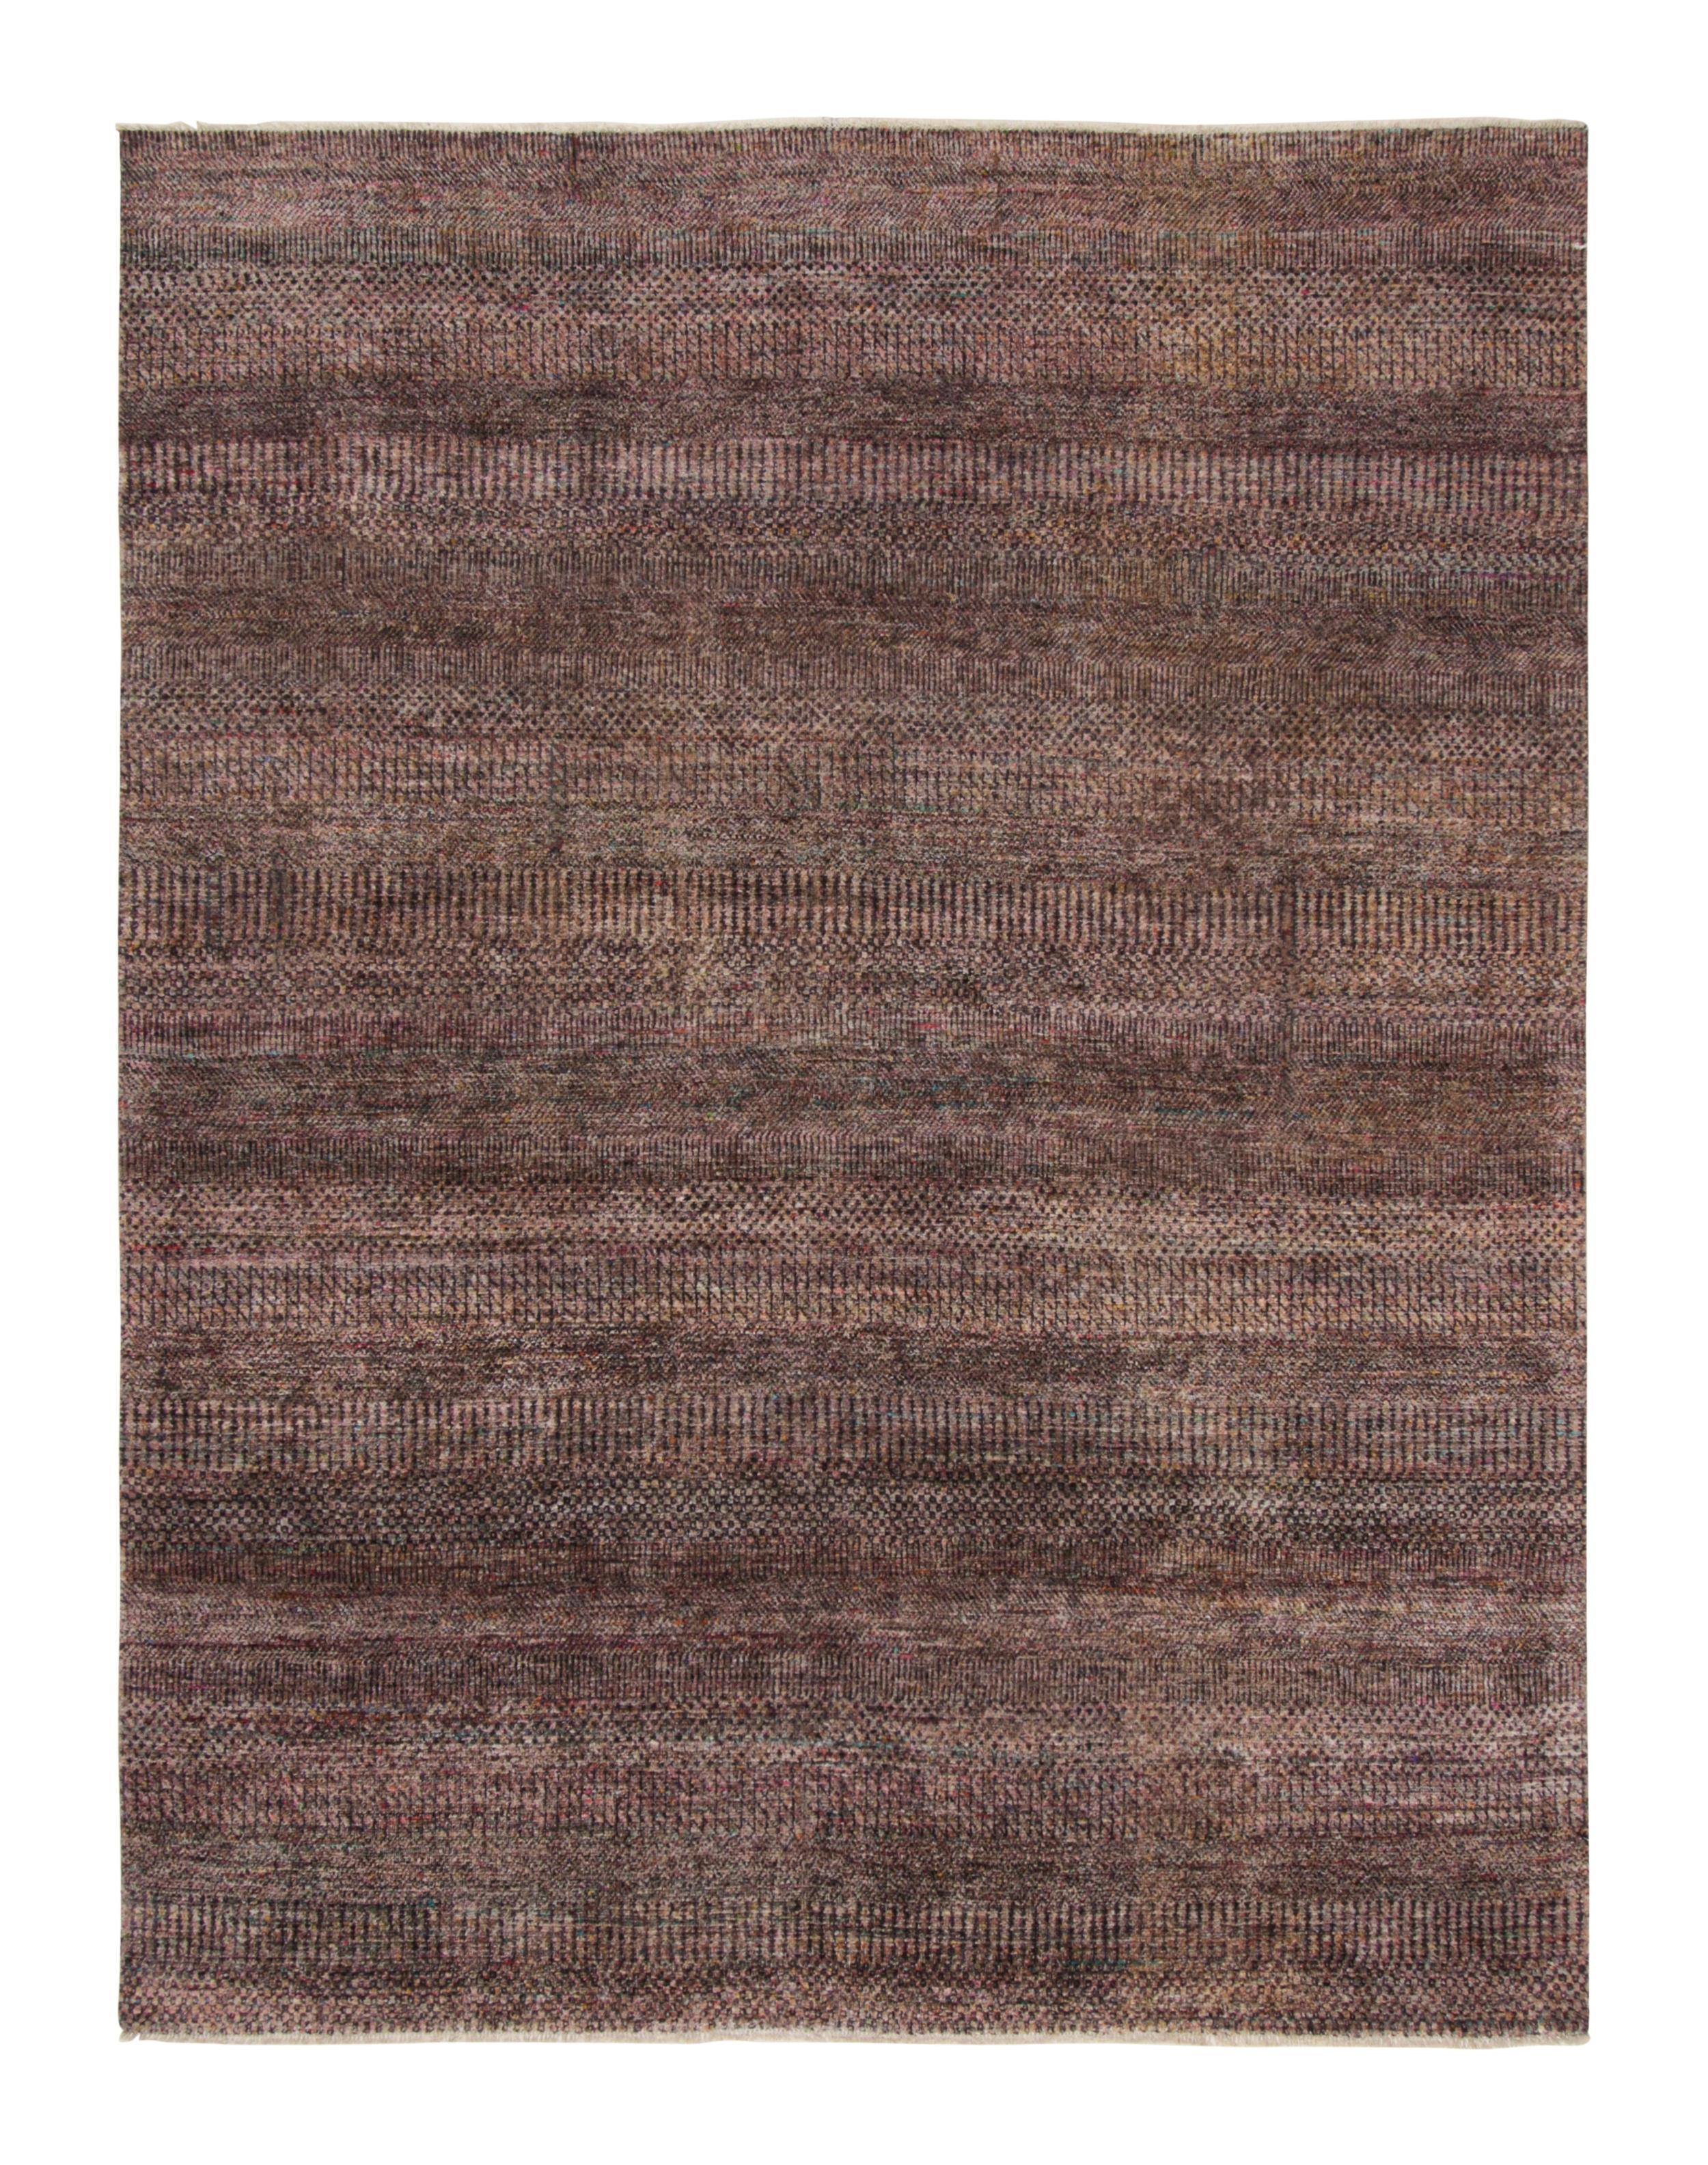 This 7x9 textural rug is an exciting new addition to the Texture of Color collection by Rug & Kilim, made with hand-knotted silk and a new take on the theme of this collection—particularly a vegetable dye like those used in antique or vintage rugs